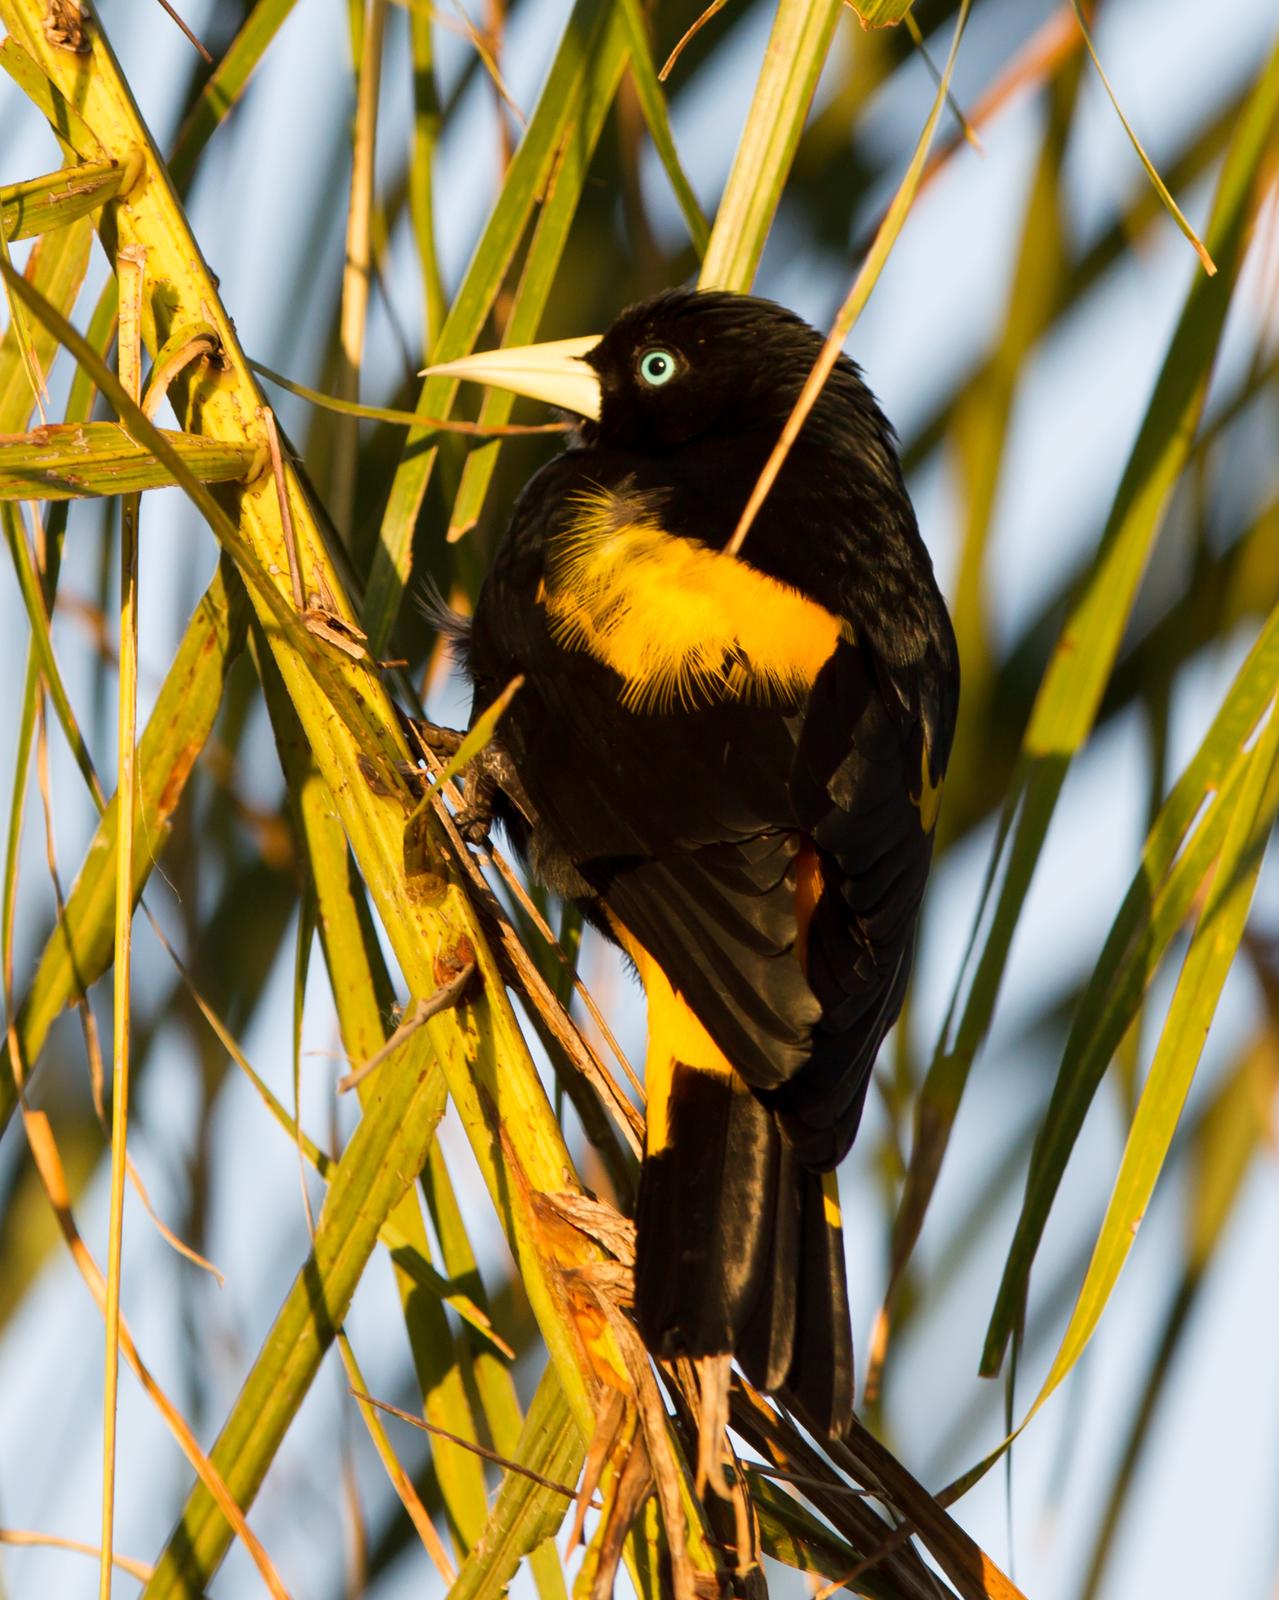 Yellow-rumped Cacique Photo by Kevin Berkoff